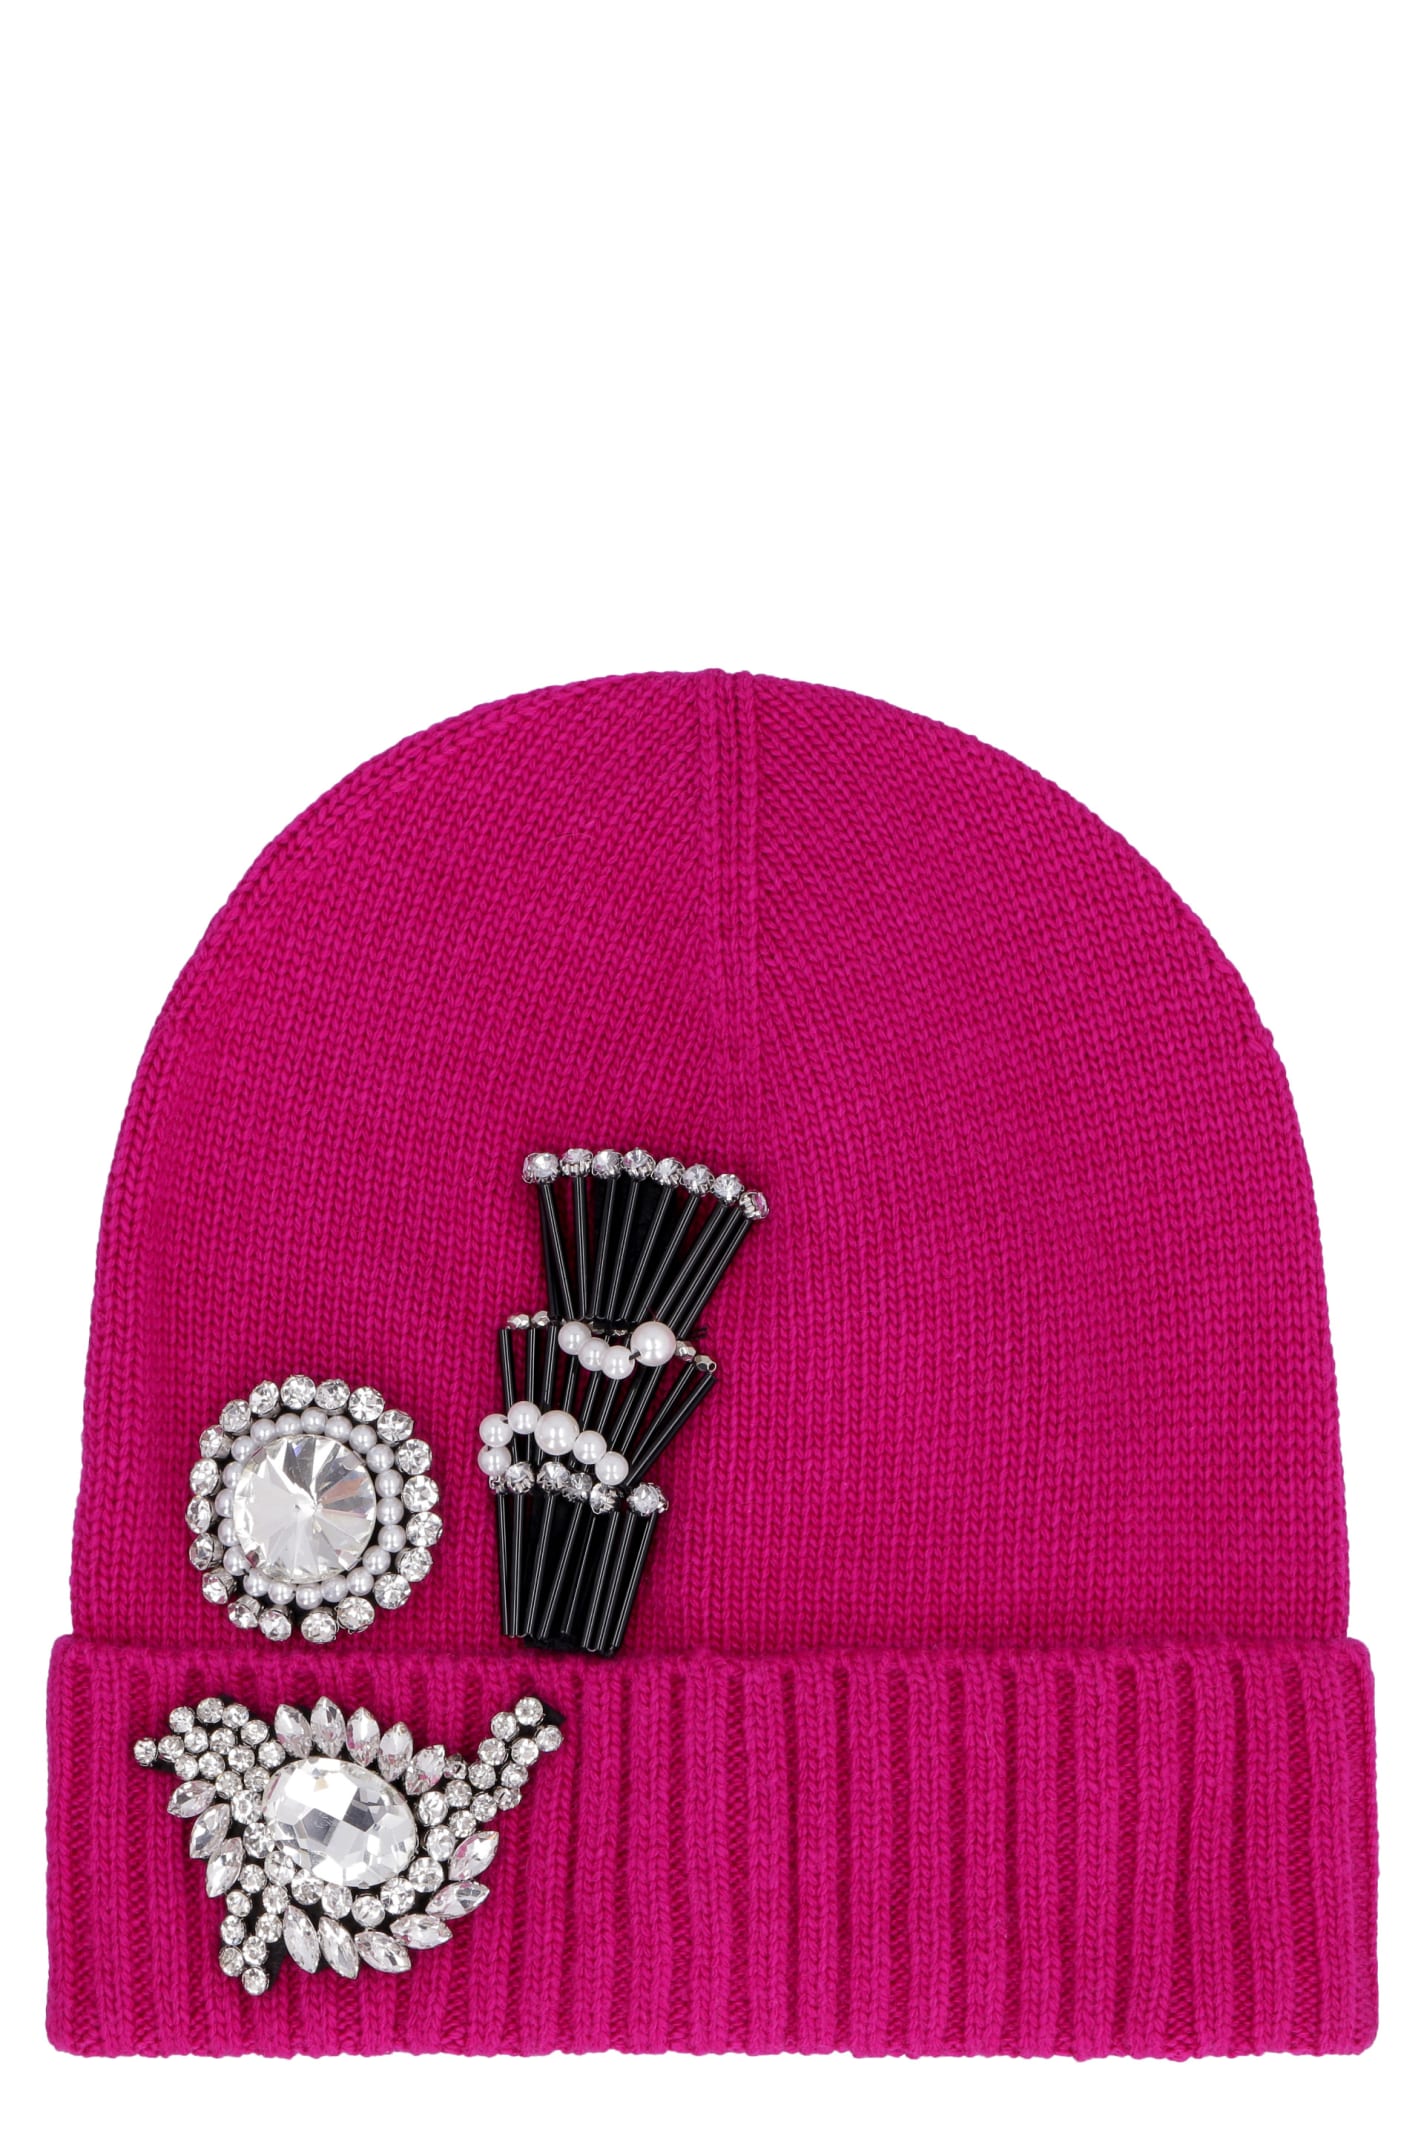 Pinko Secco Knitted Beanie